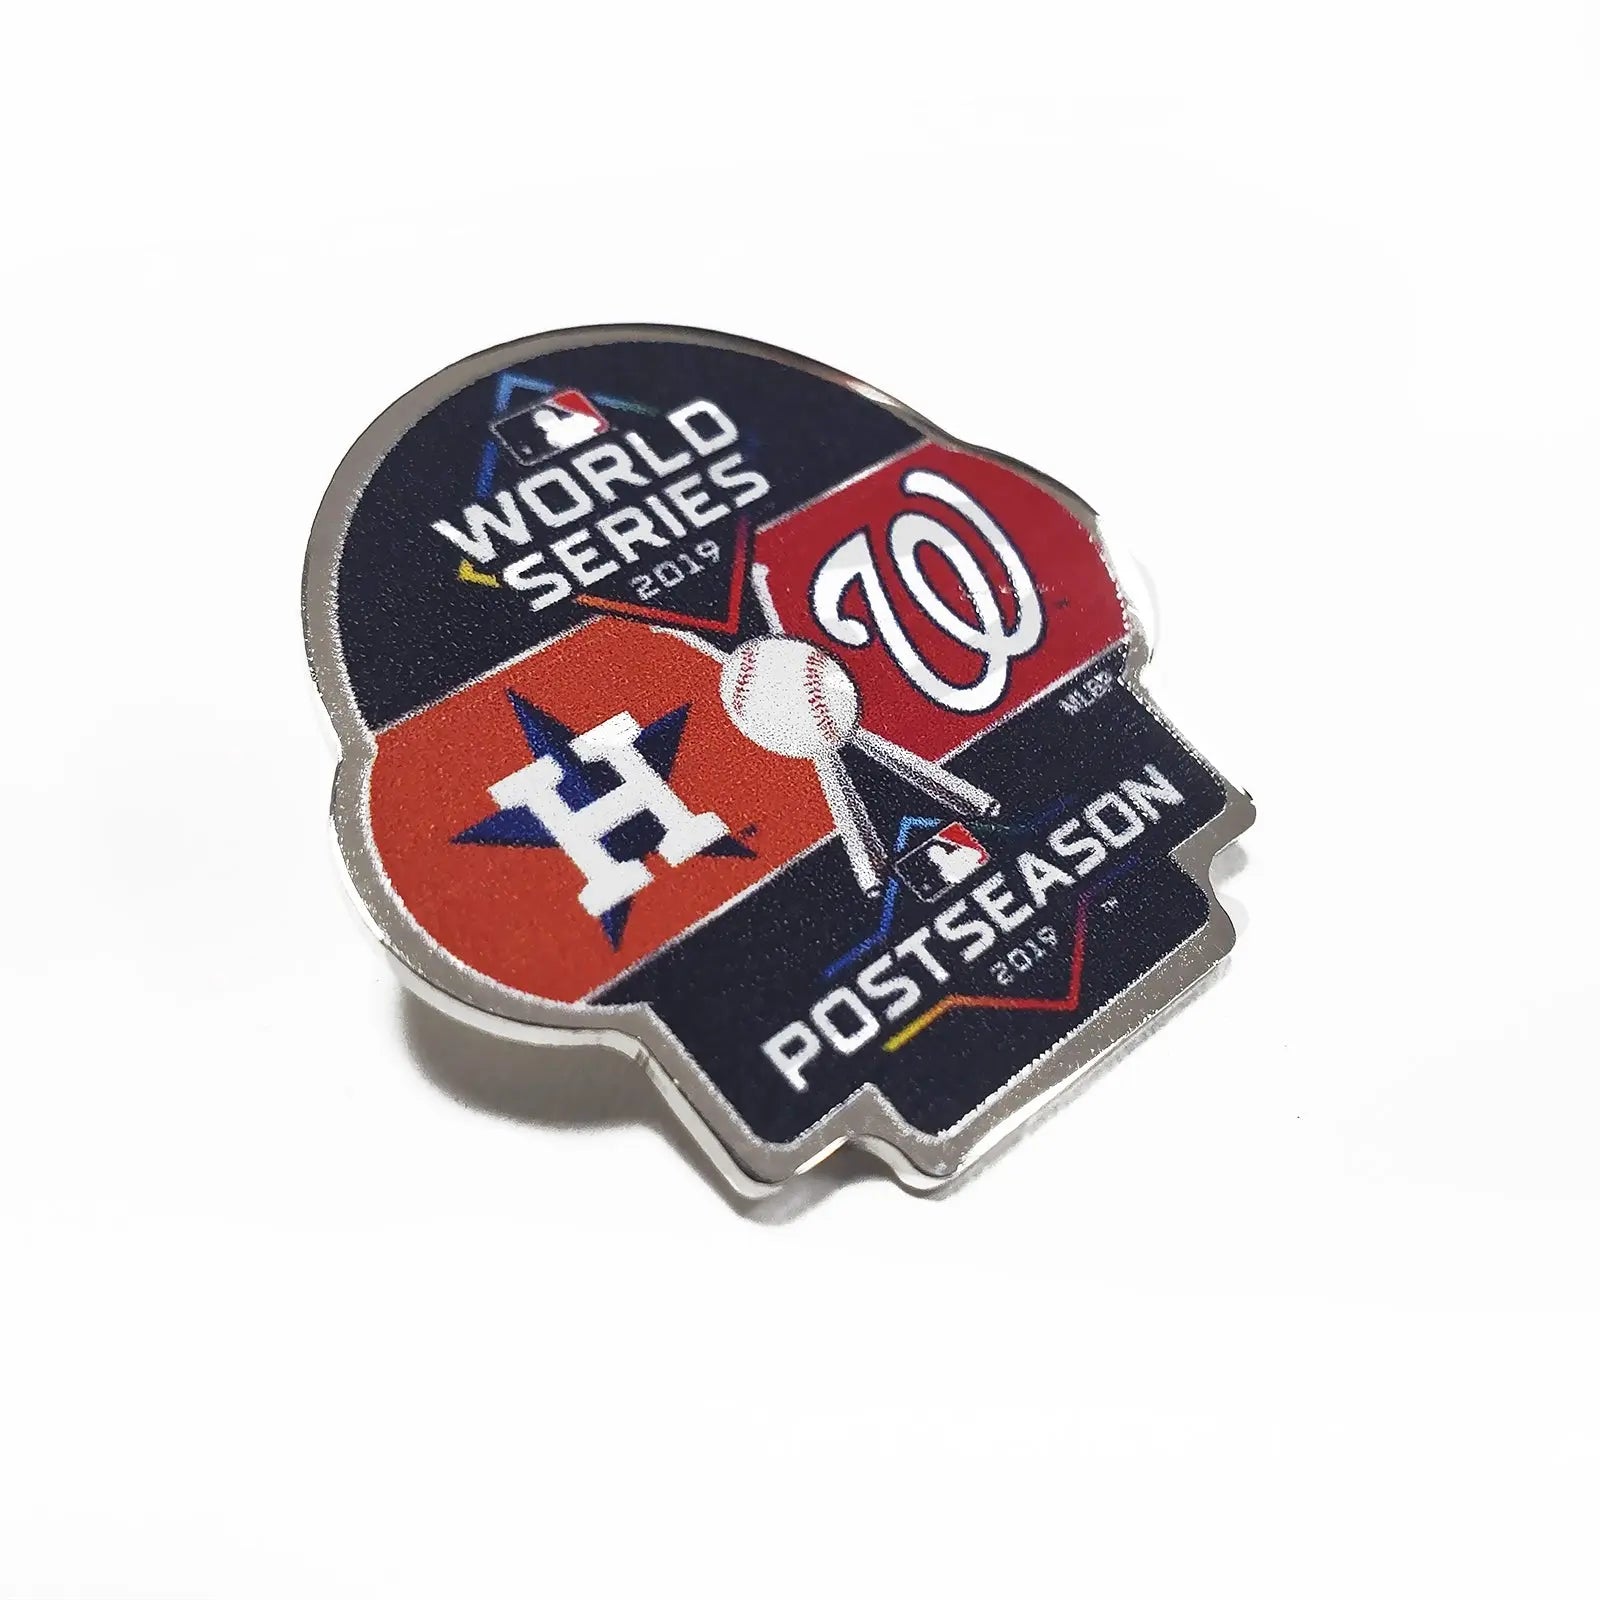 Pin on Astros